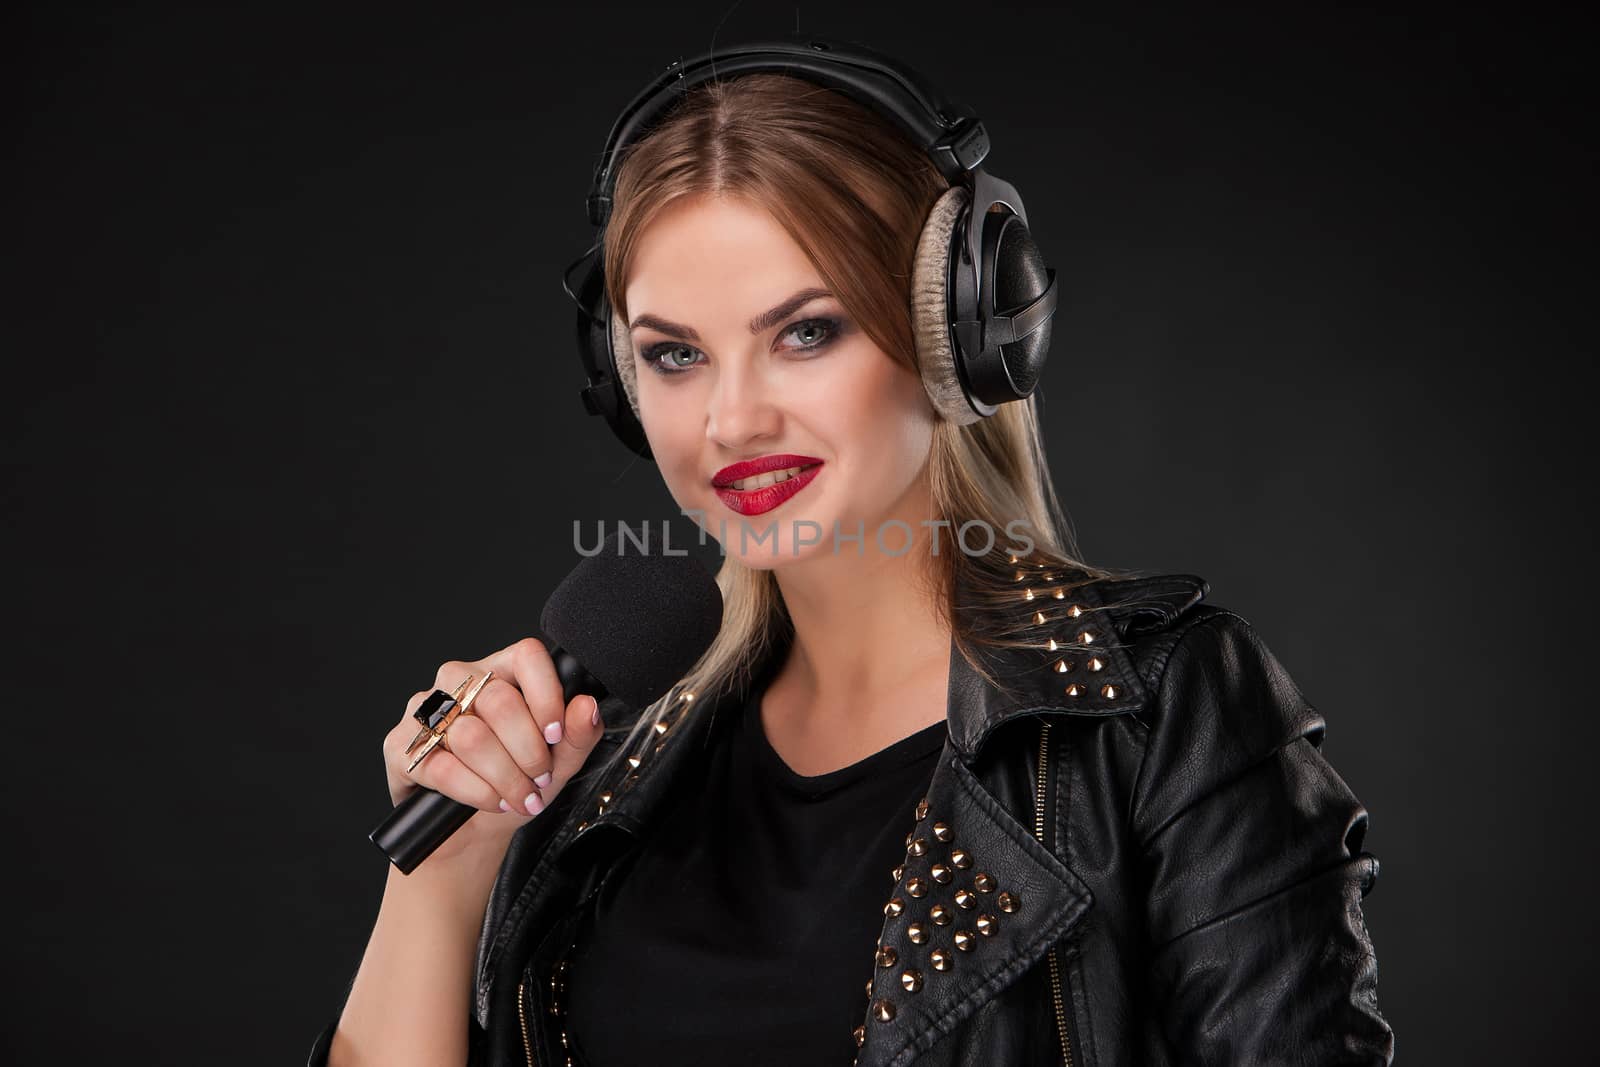 Portrait of a beautiful blonde young woman singing into microphone with headphones in studio on black background